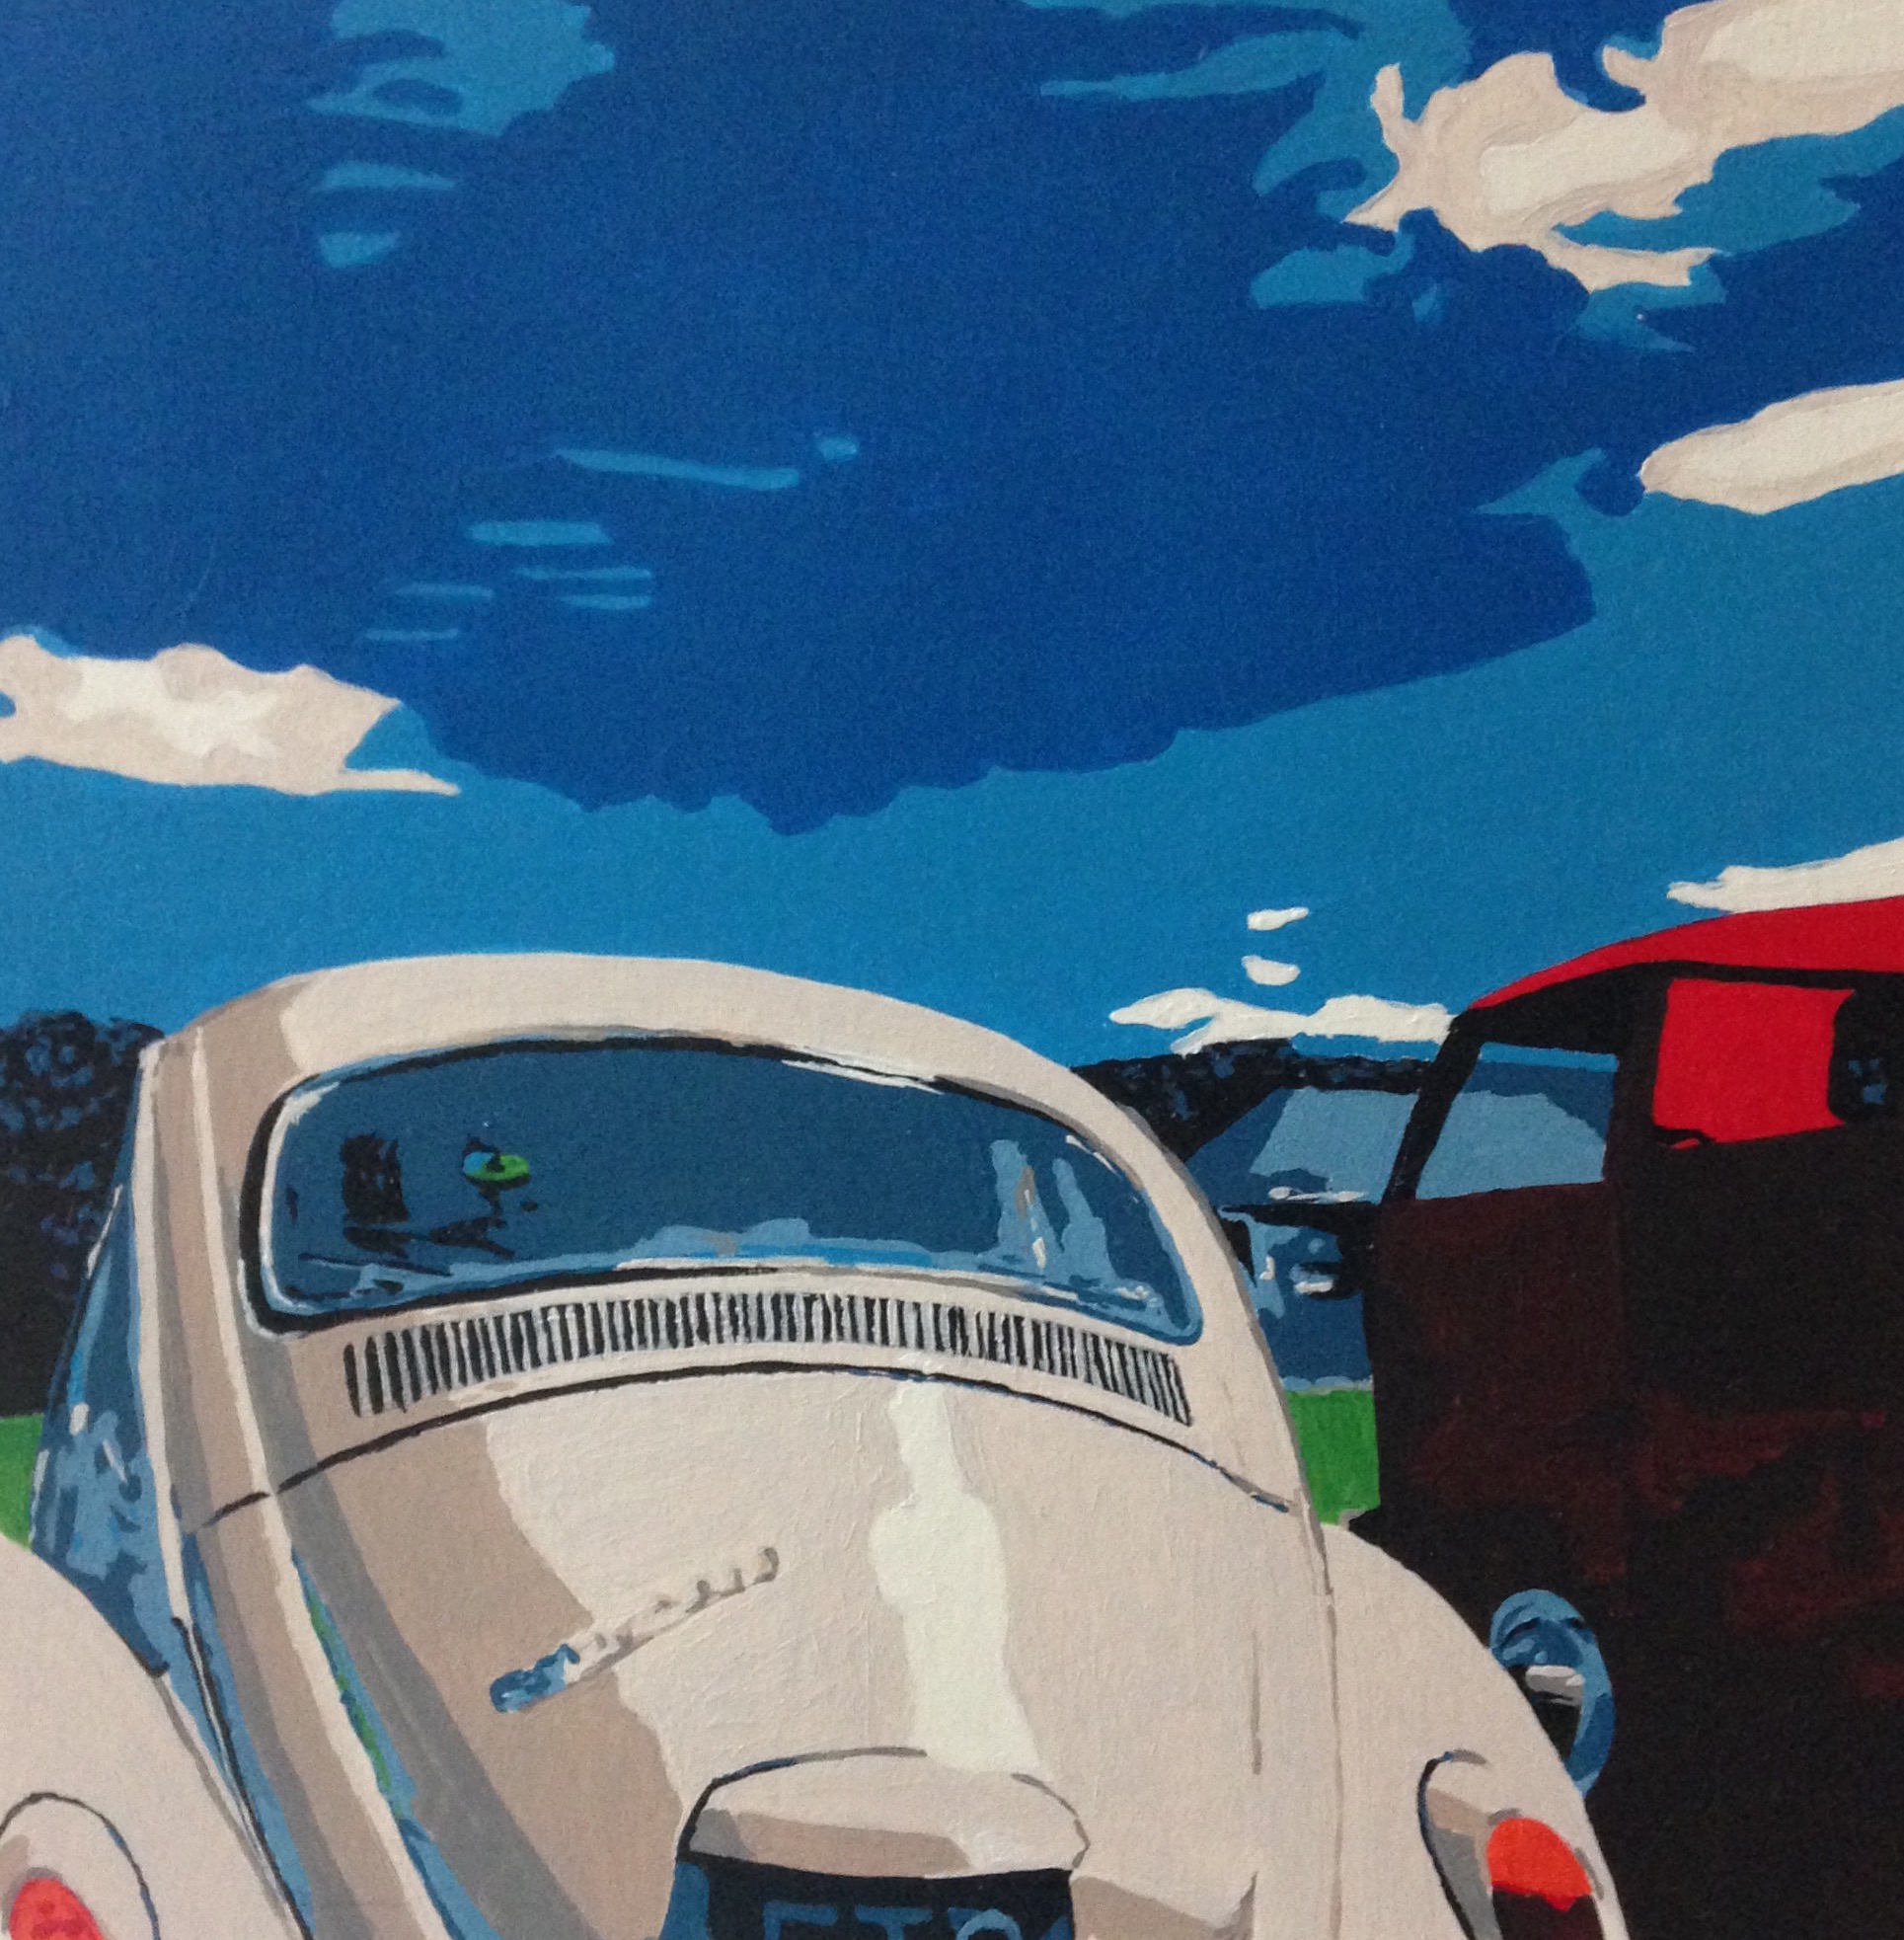 VW Beetle painting by Louisa Hill